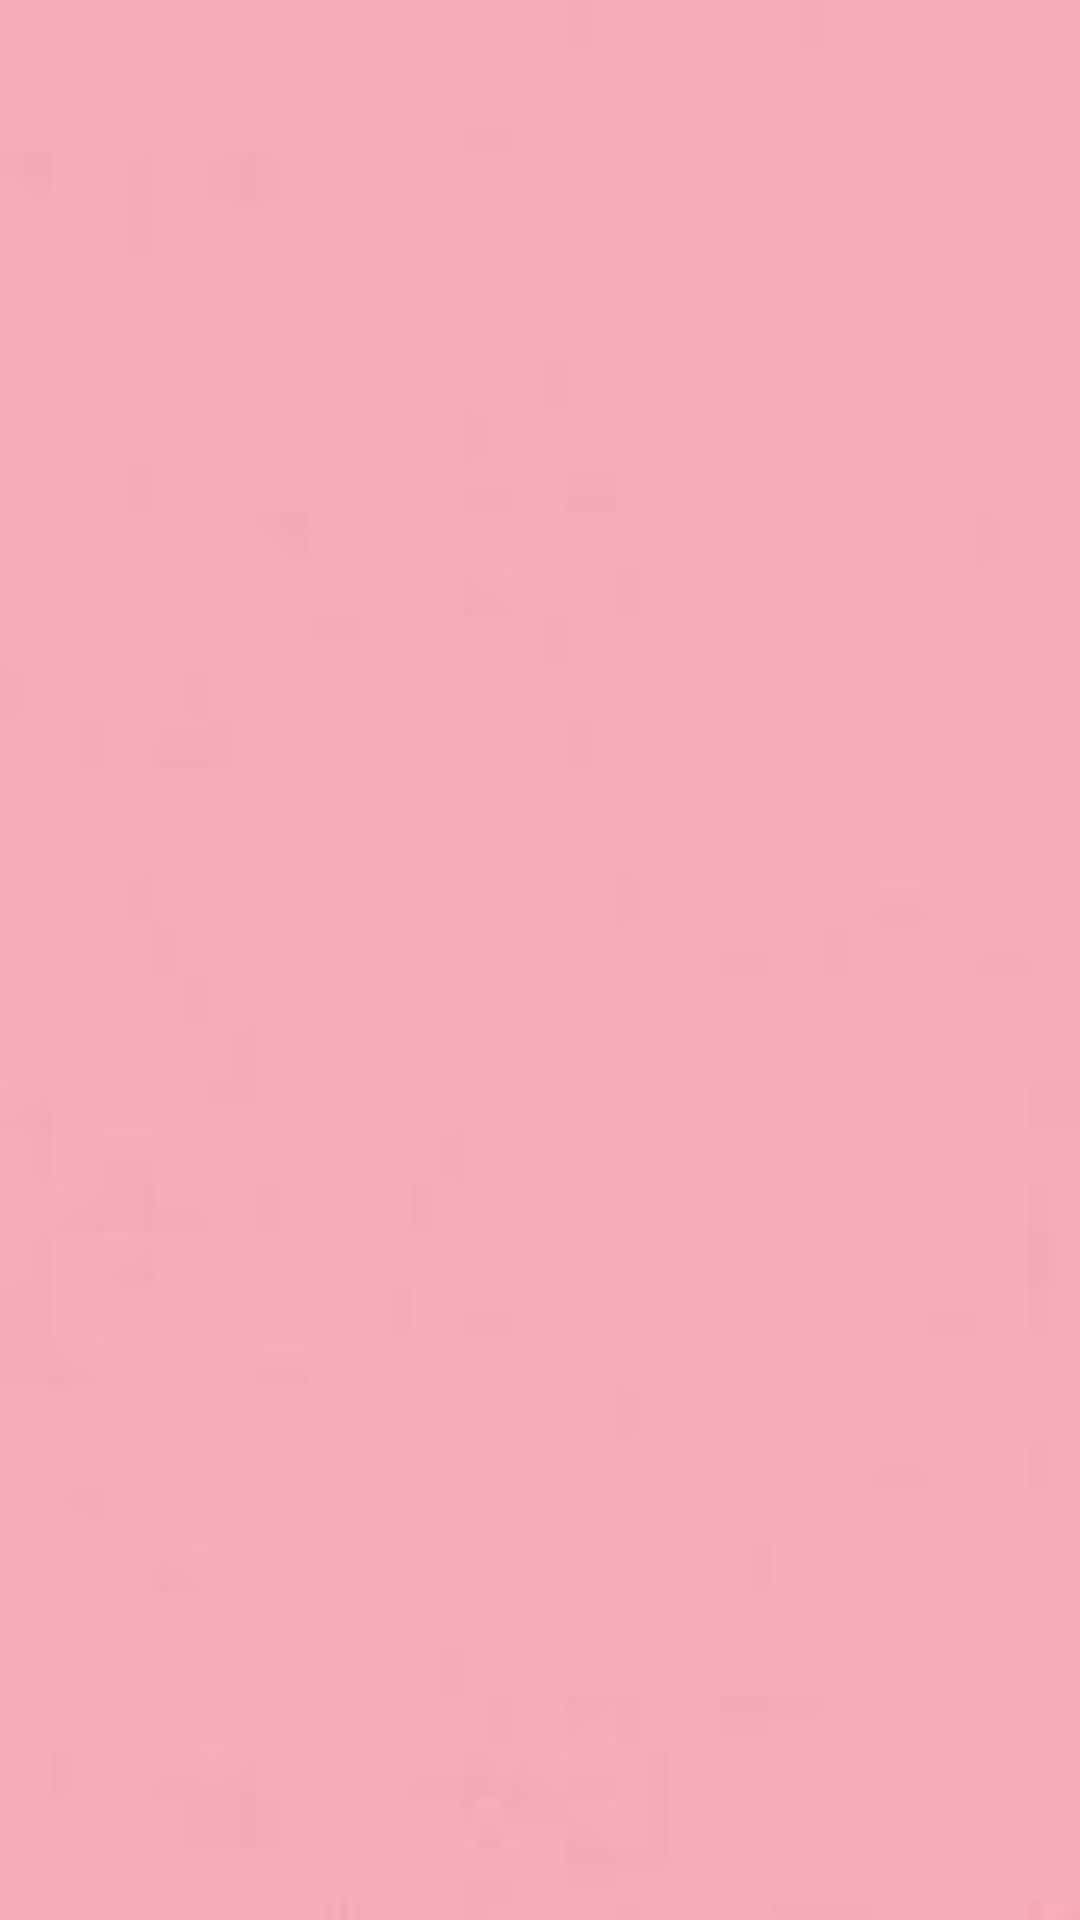 Soft, Subtle, and Sweet - Pink Solid Wallpaper